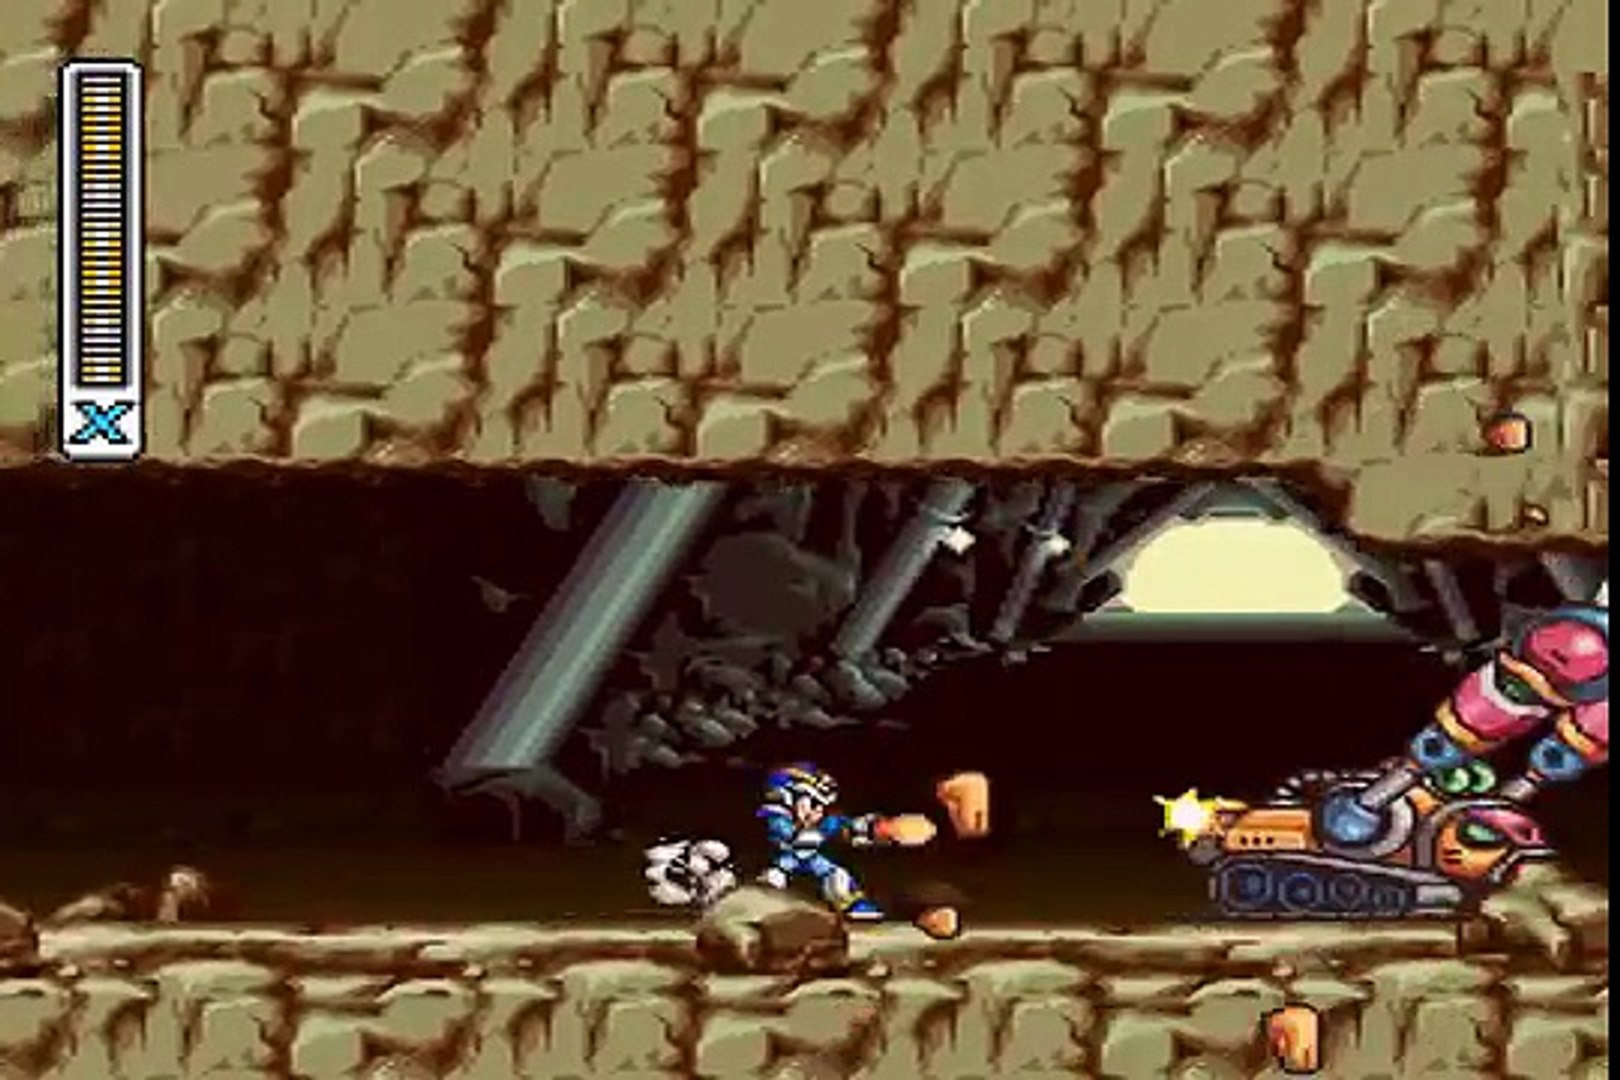 Mega Man X: Part 11: Getting the Hadoken from Armored Armadillo's Stage